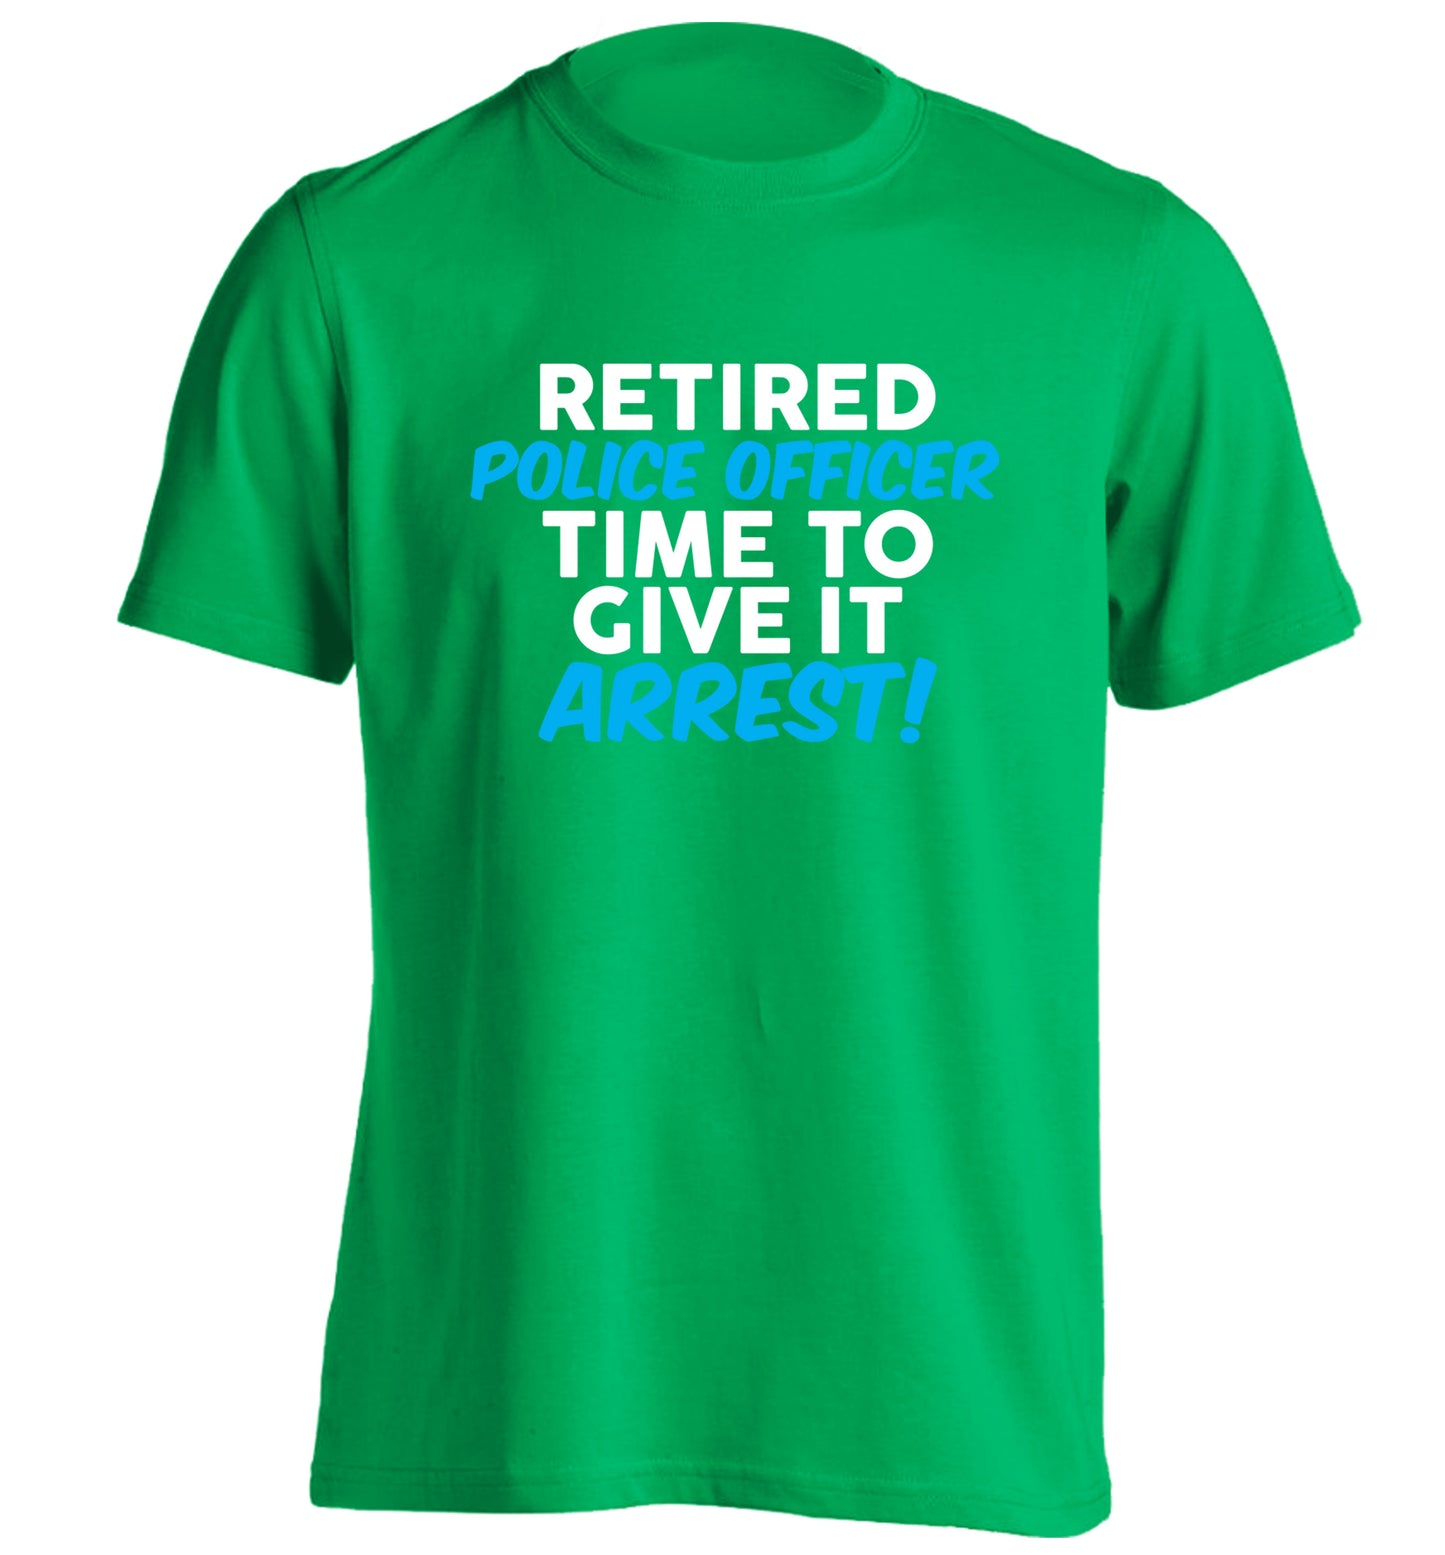 Retired police officer time to give it arrest adults unisex green Tshirt 2XL